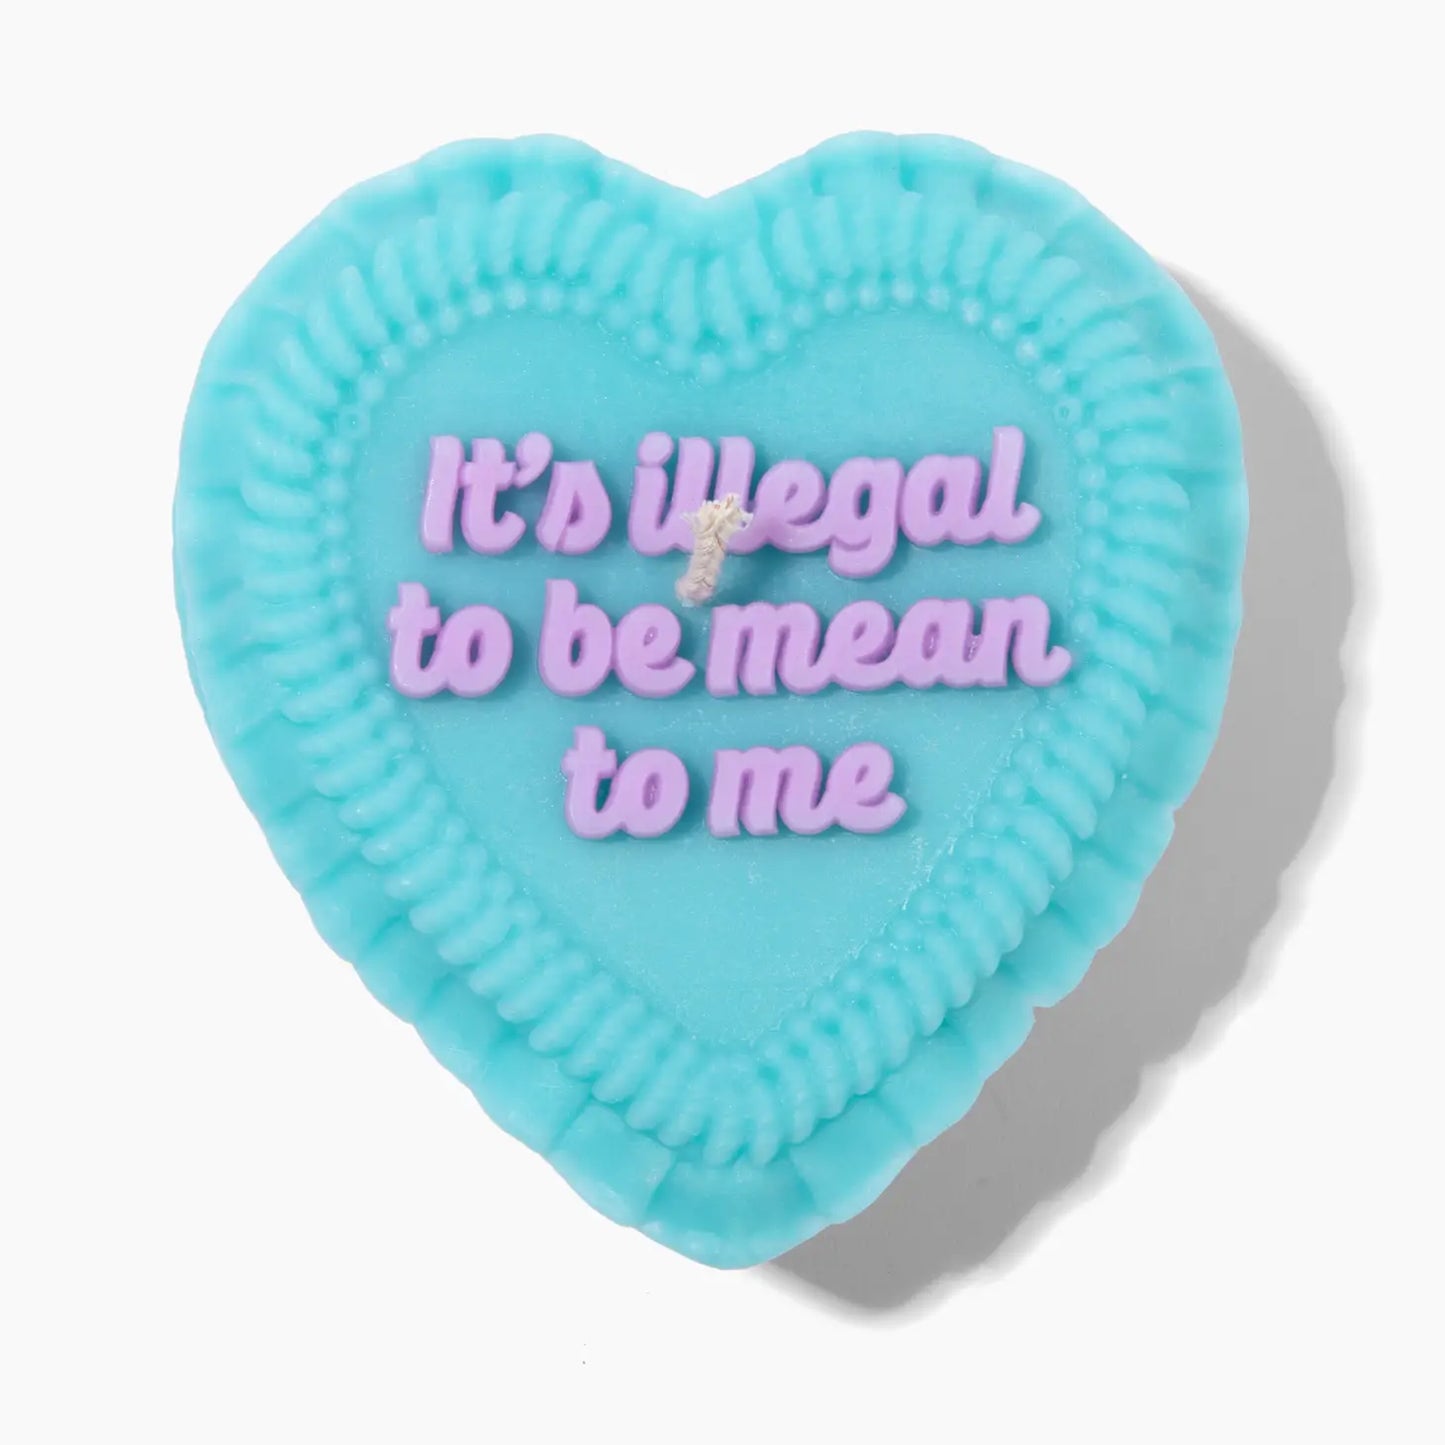 Retro Cake Candle - It’s illegal to be mean to me